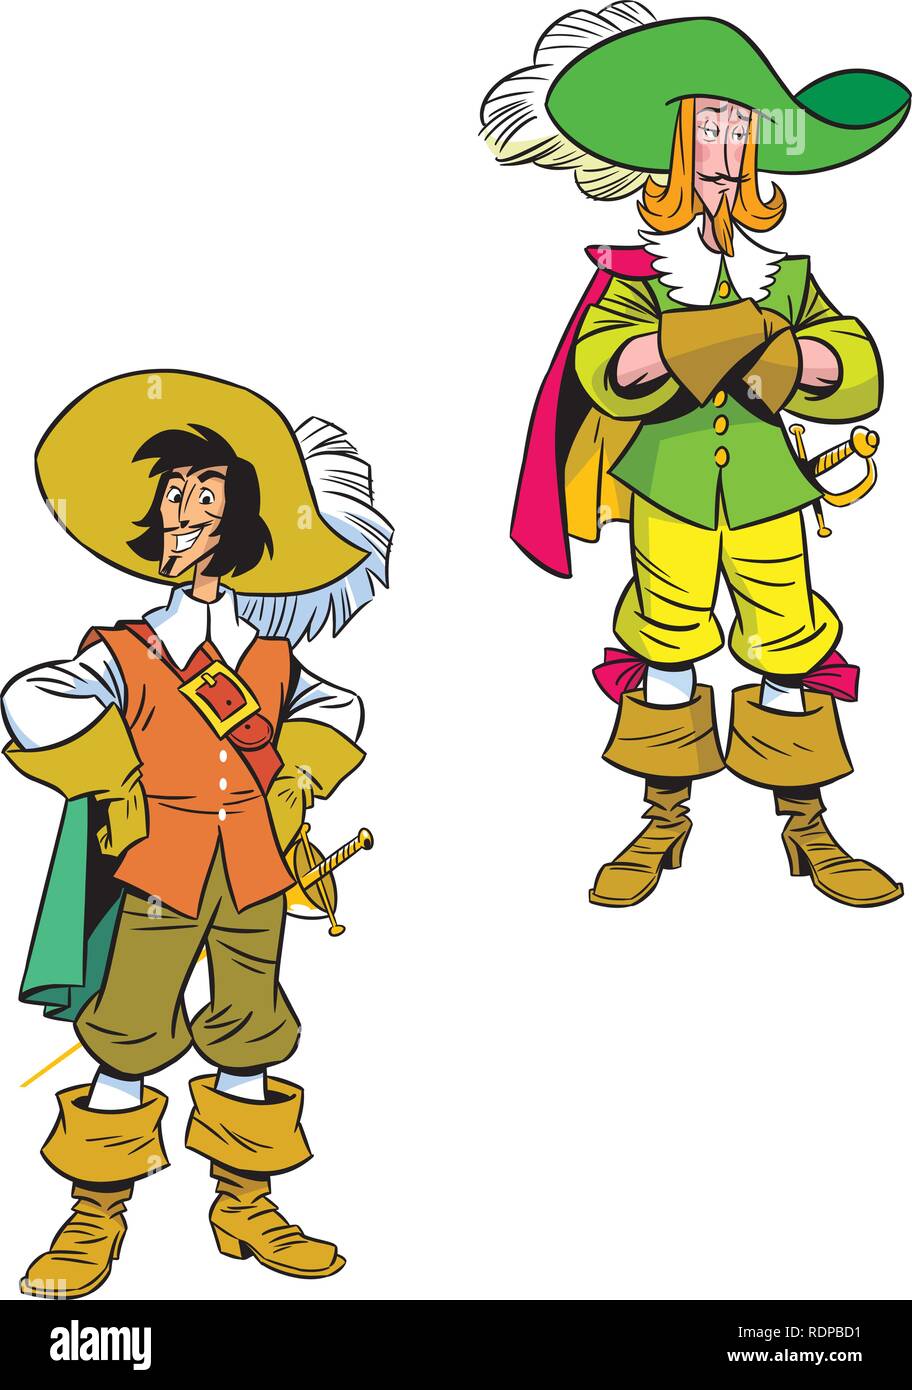 In the illustration, two cartoon musketeers in various poses. Stock Vector